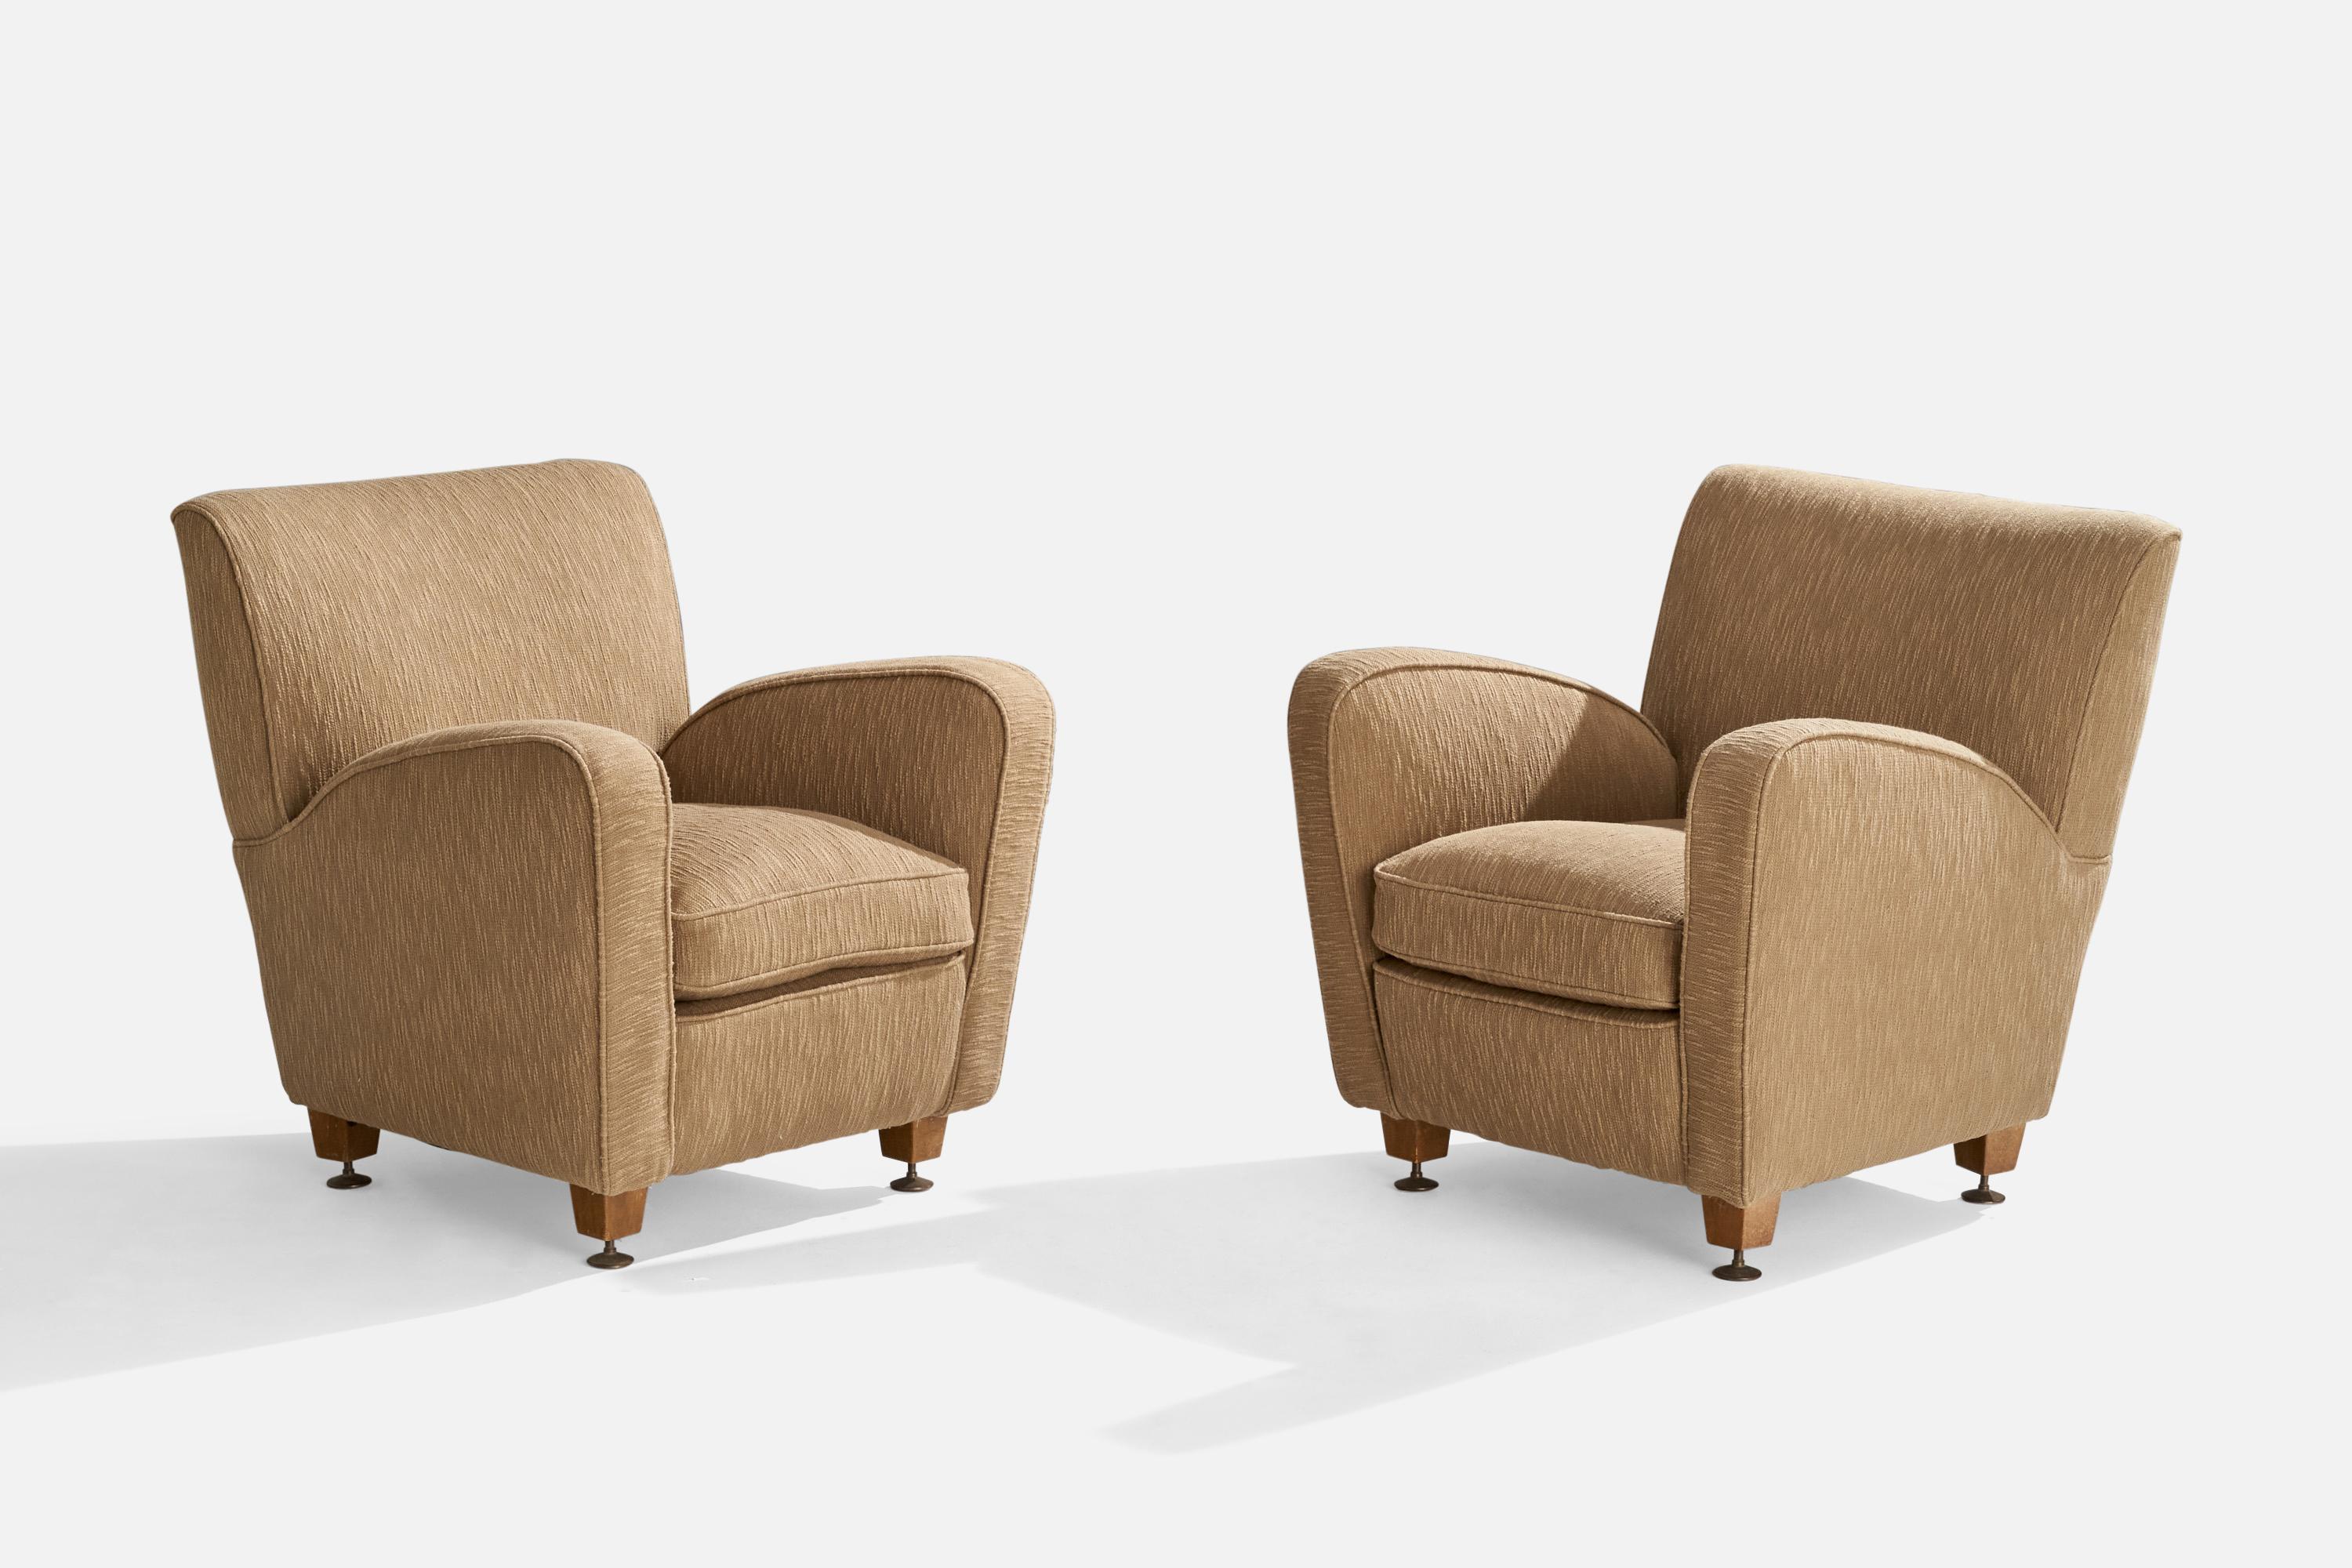 A pair of beige fabric, wood and brass lounge chairs designed and produced in Italy, 1940s.

Seat height: 17”